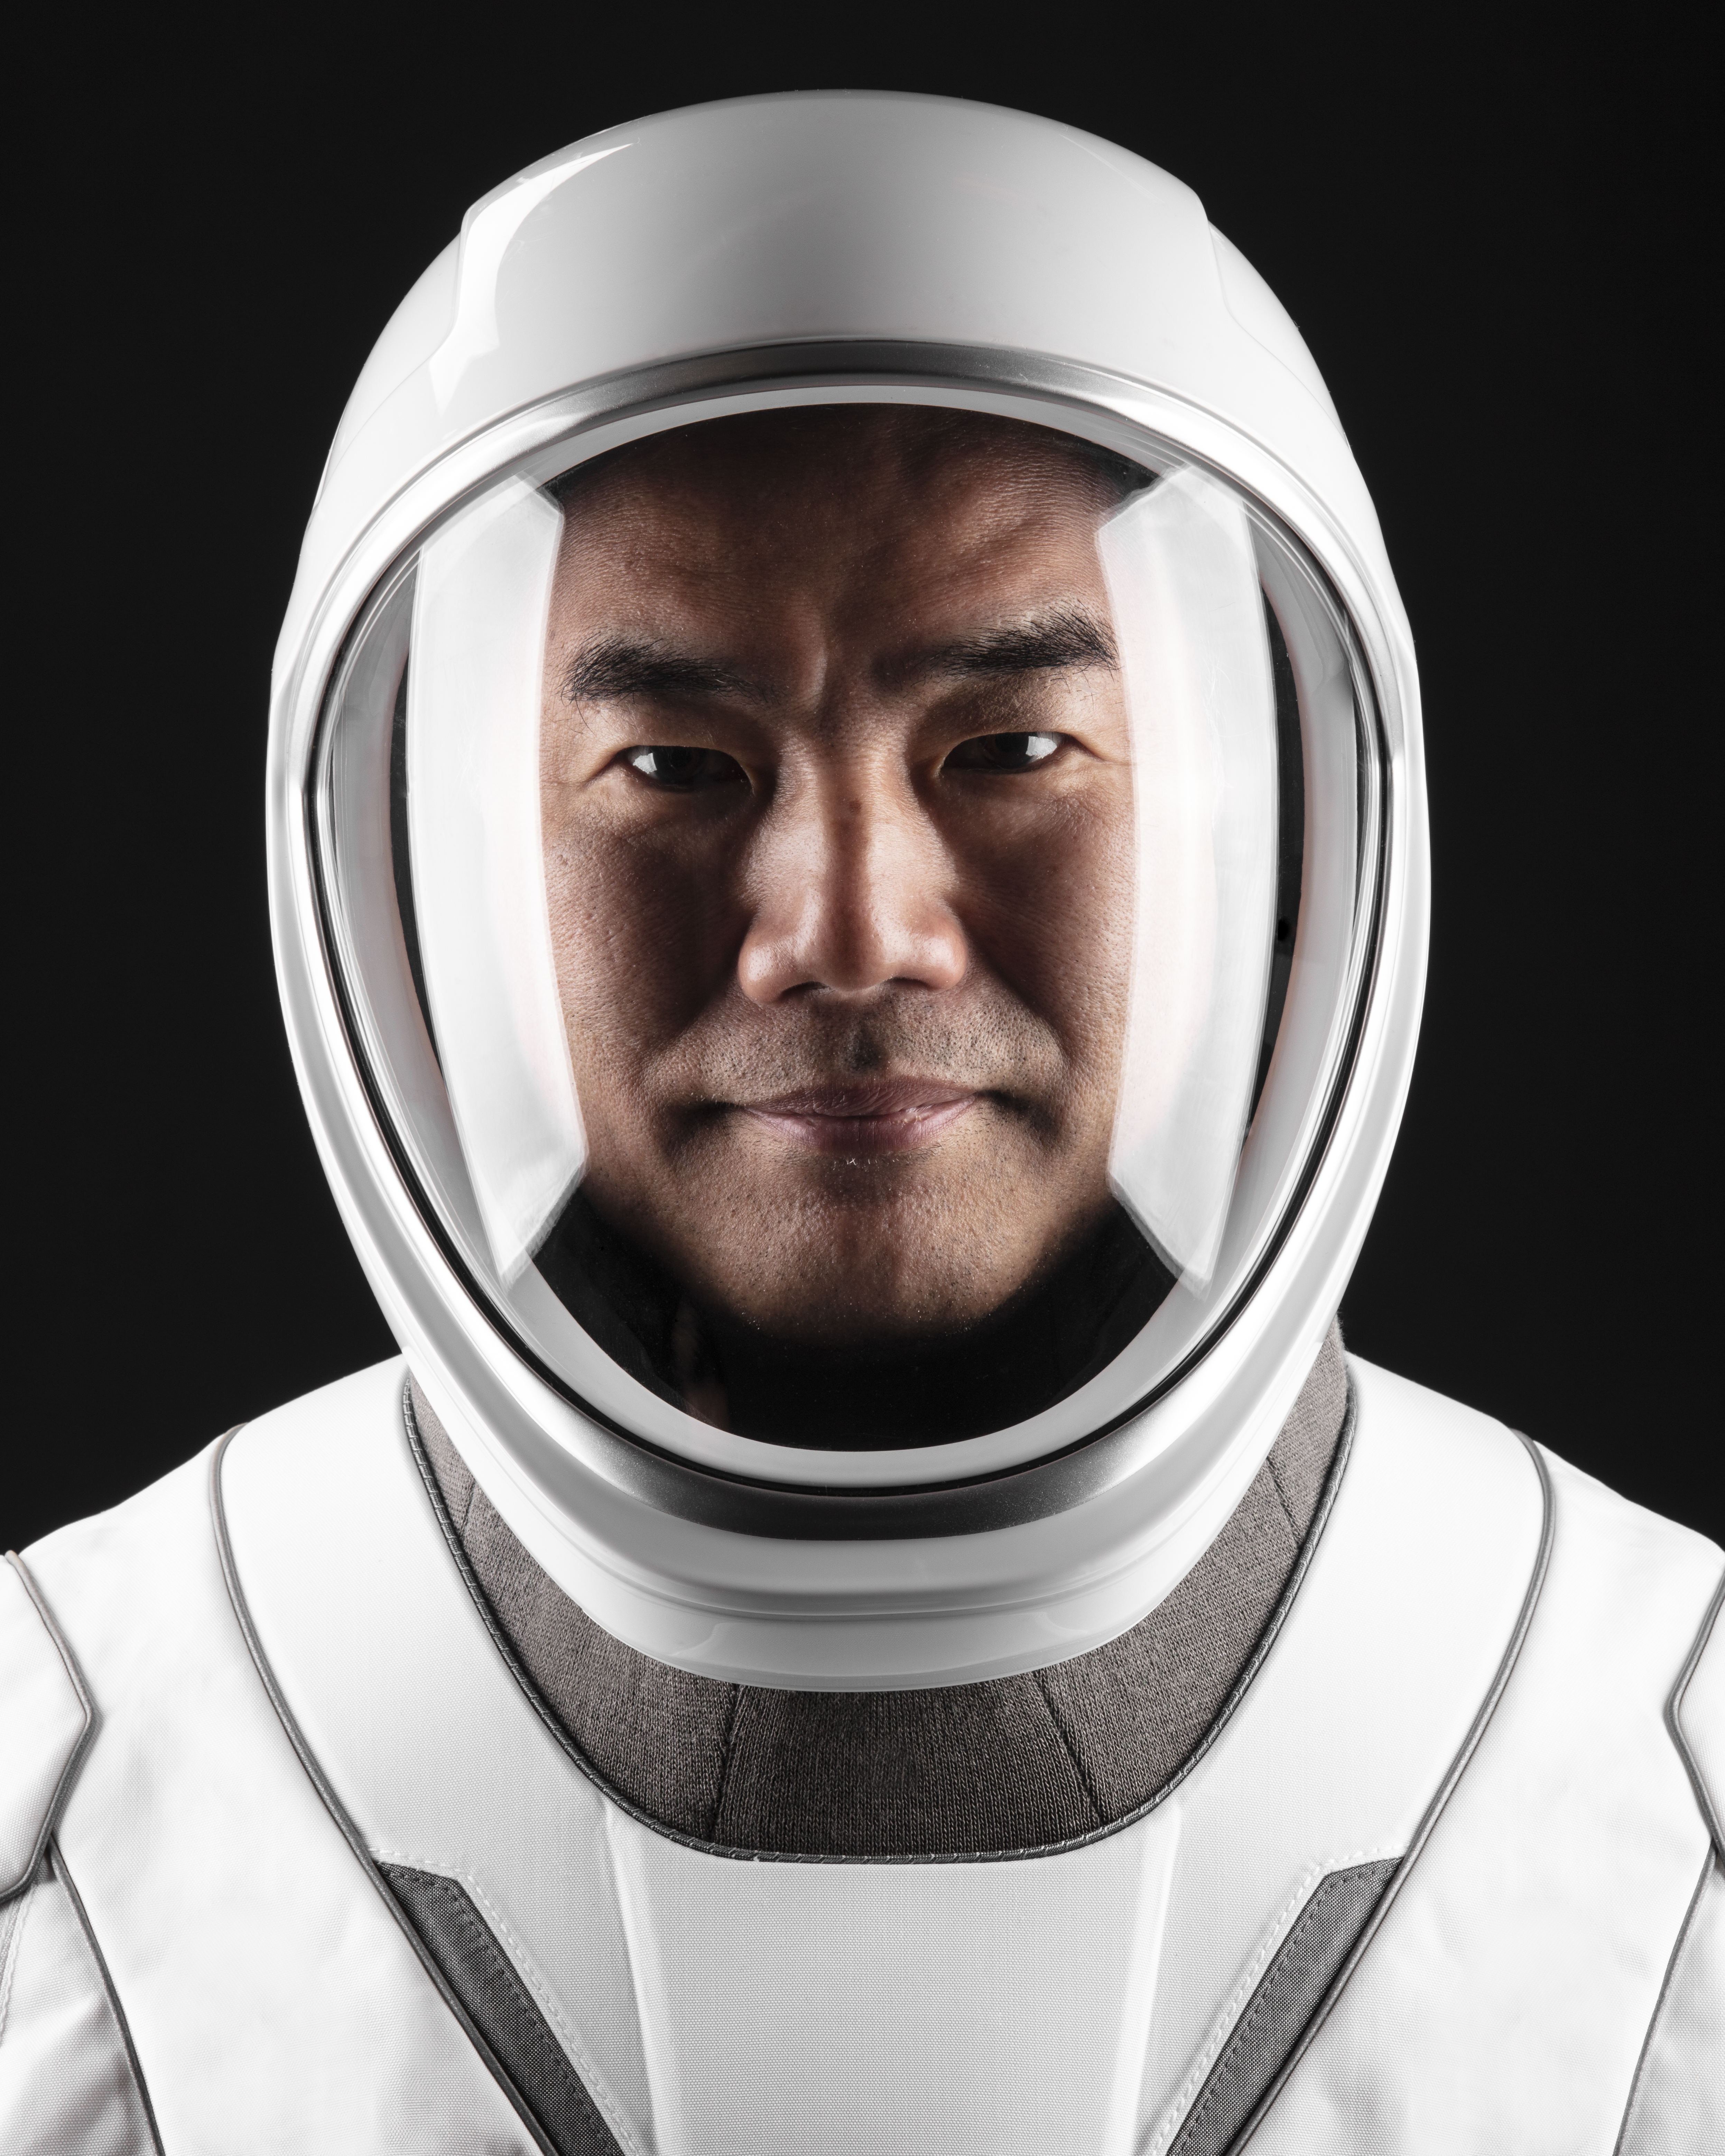 NASA's SpaceX Crew-1 Mission Specialist Soichi Noguchi is photographed in his SpaceX spacesuit.